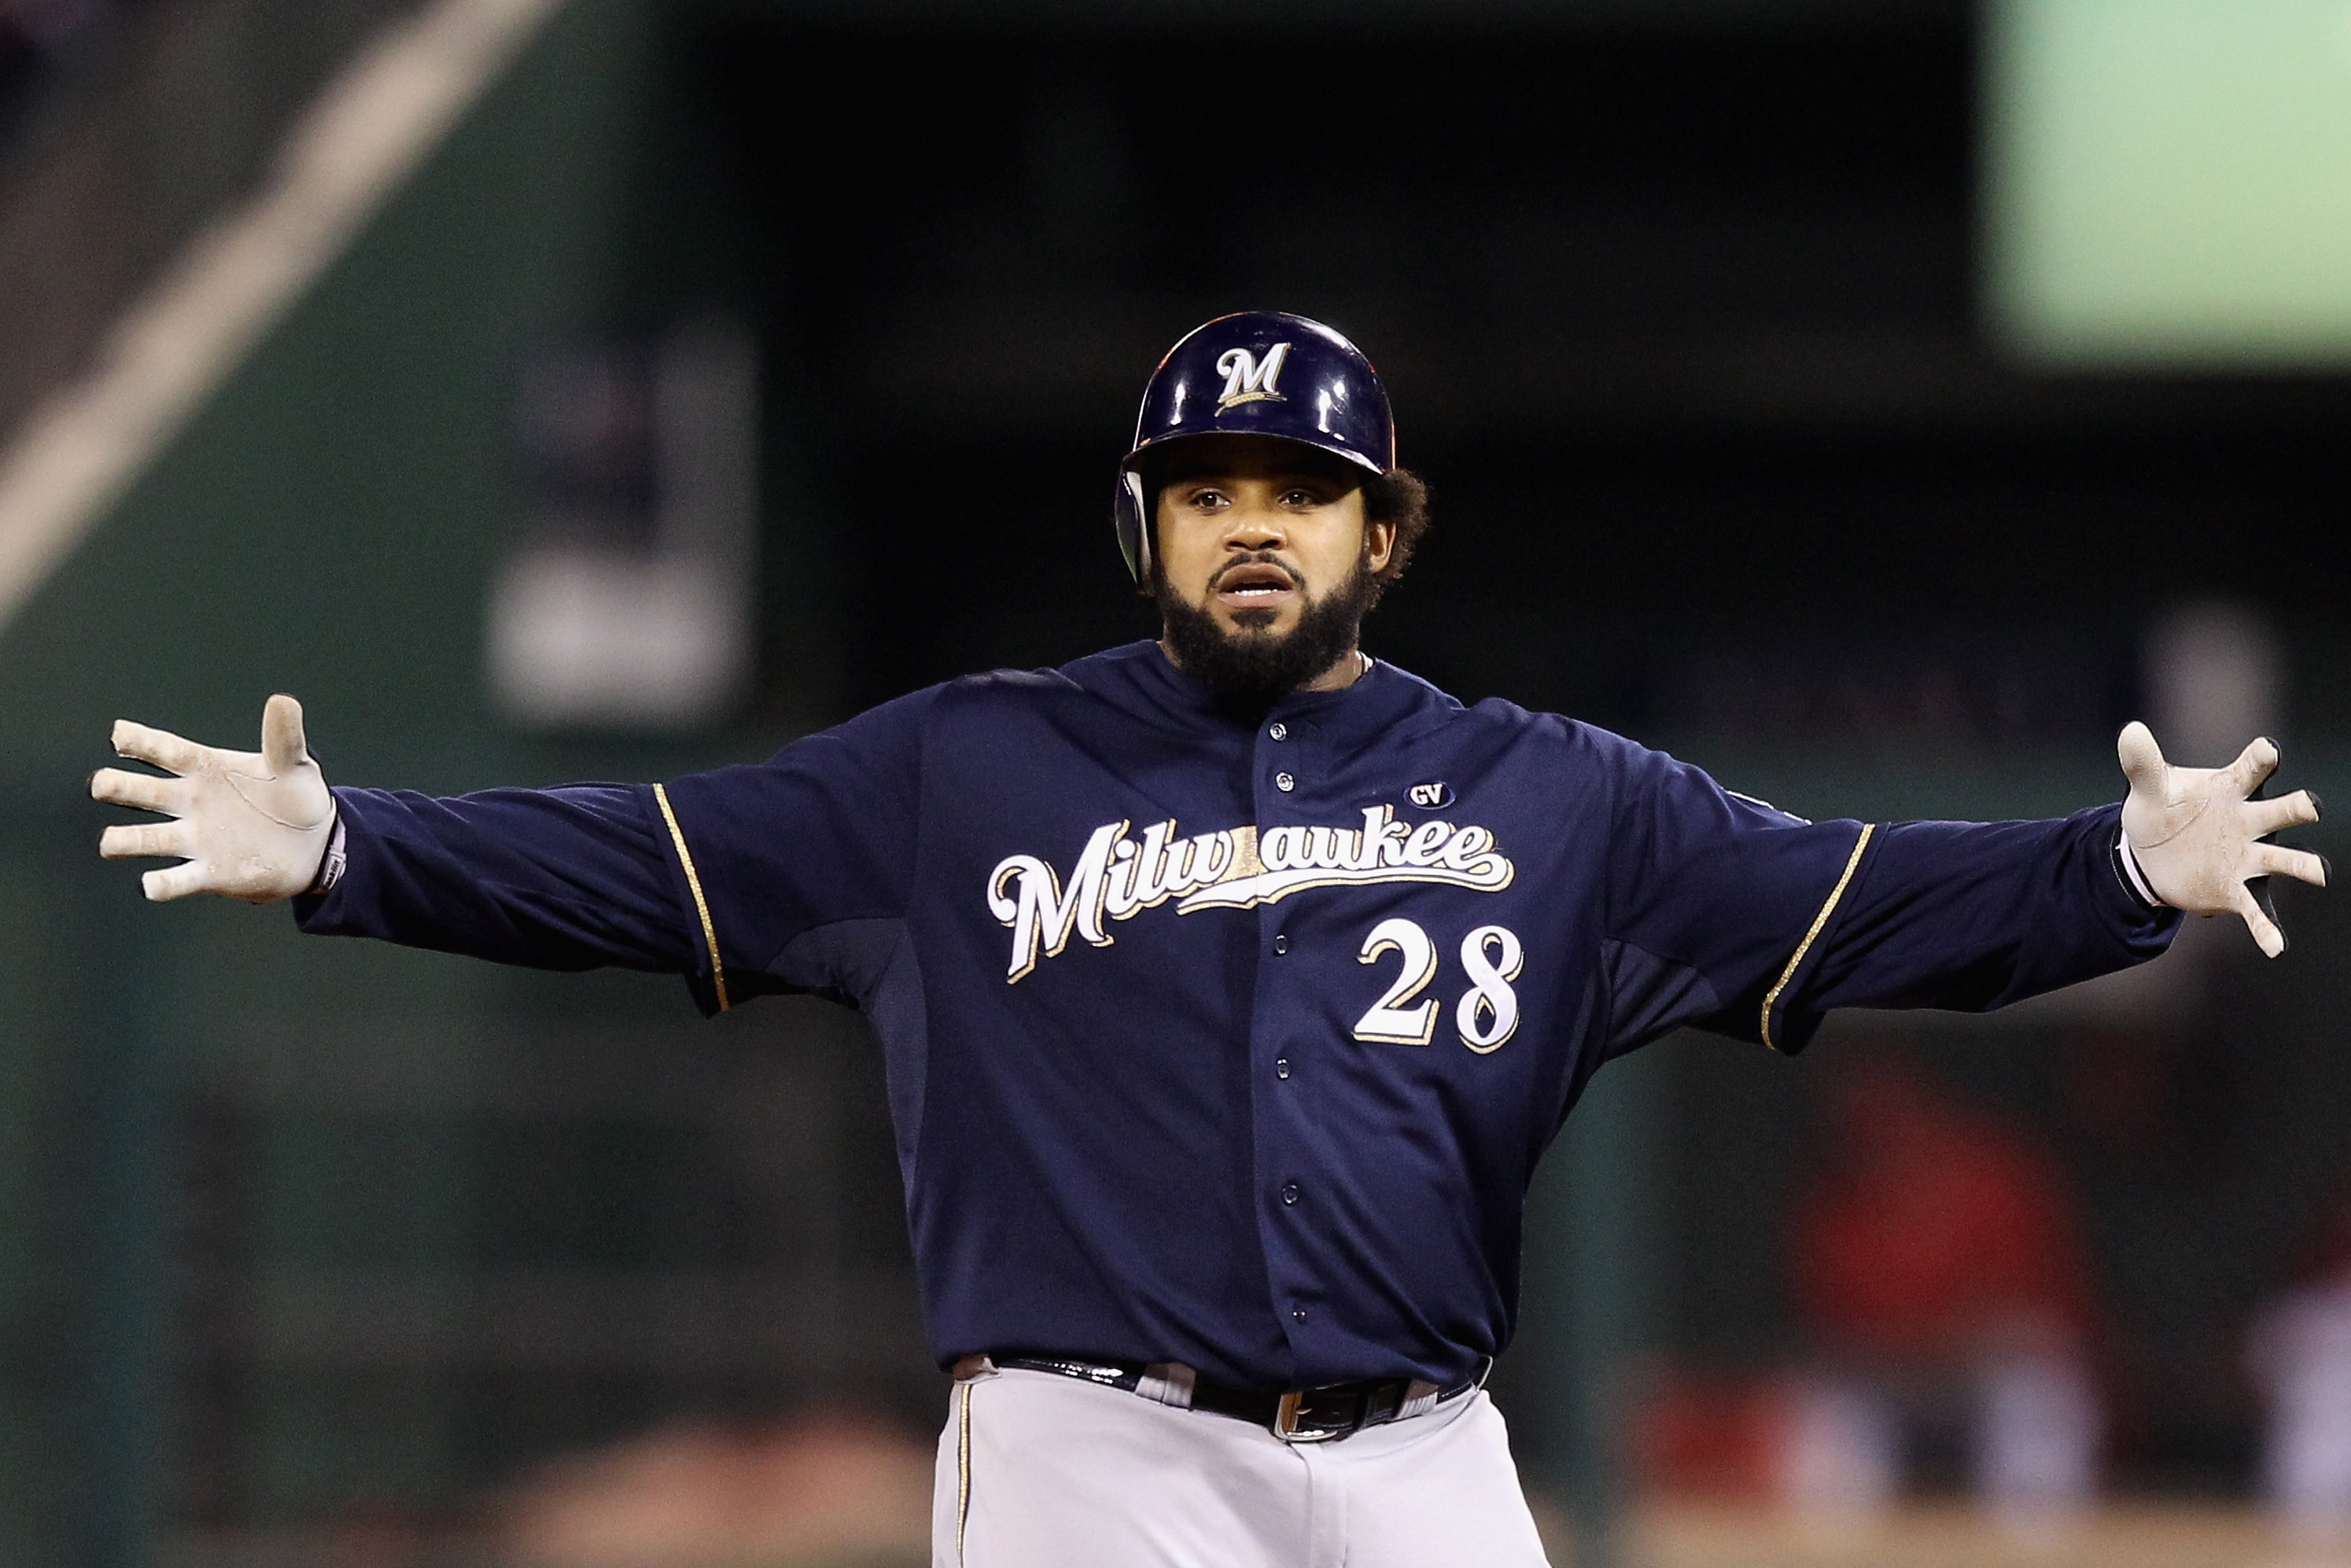 Detroit Tigers' signing of Prince Fielder: Ranking it among top